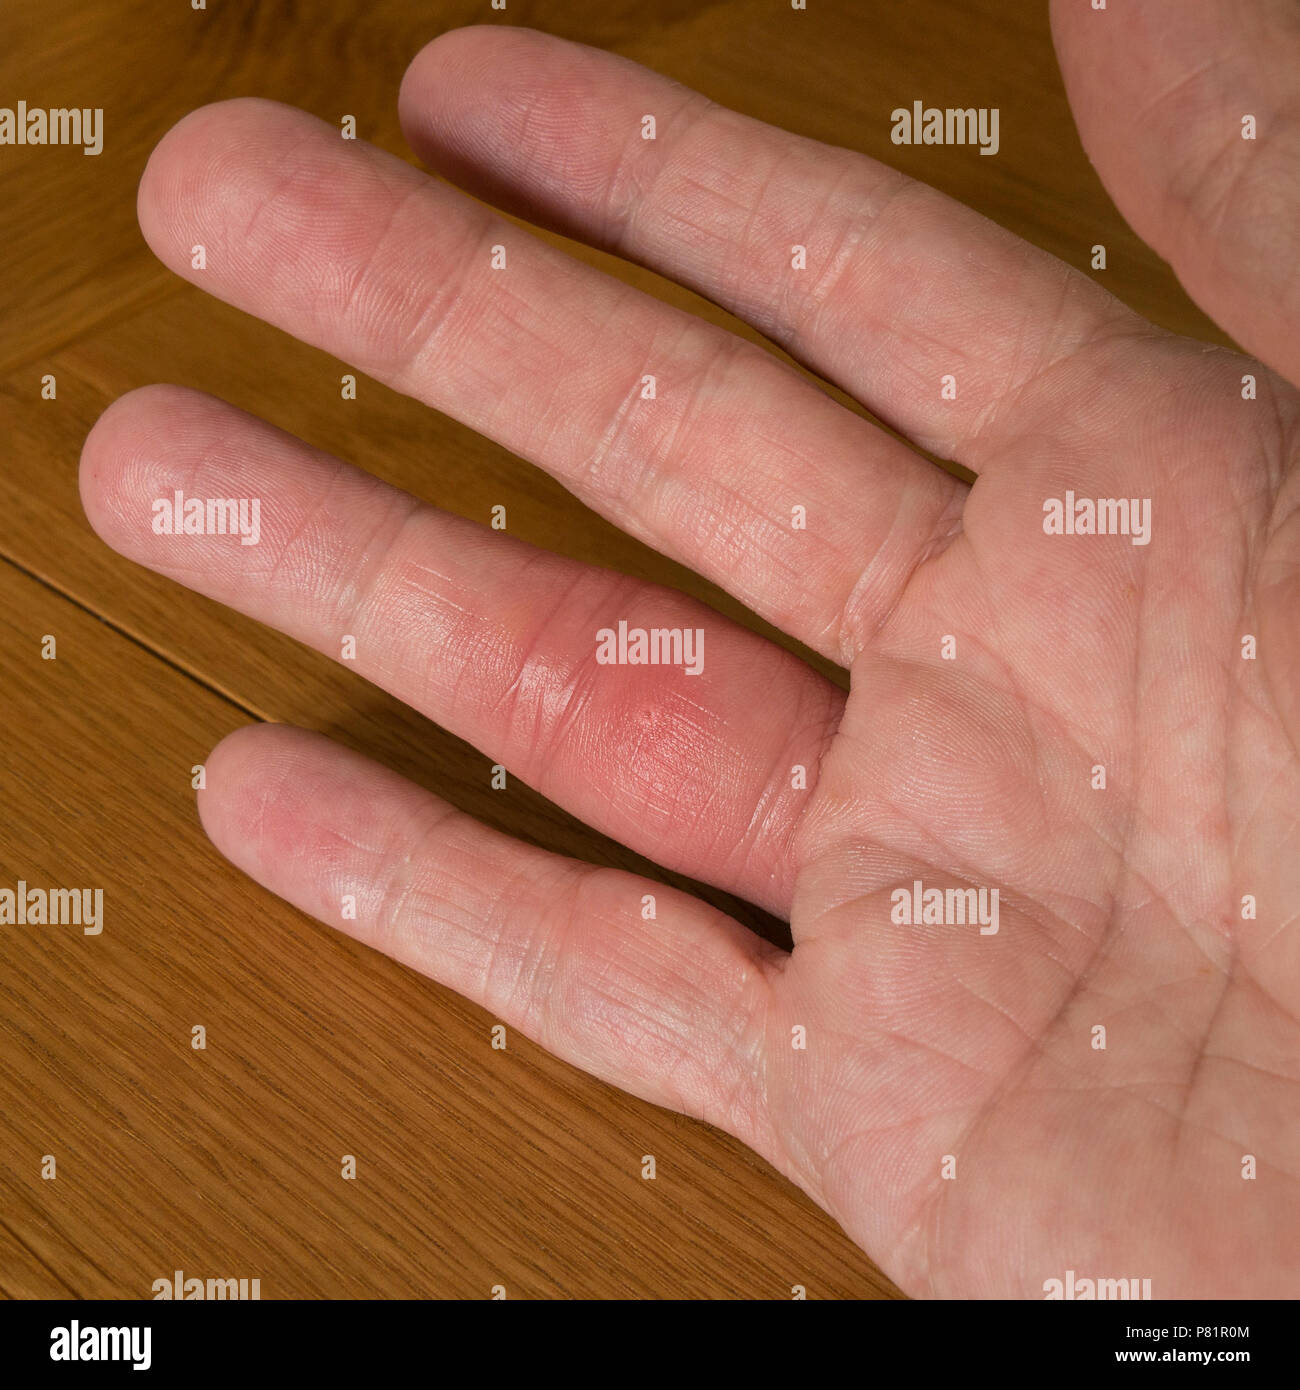 Swollen red finger on hand following insect bite Stock Photo